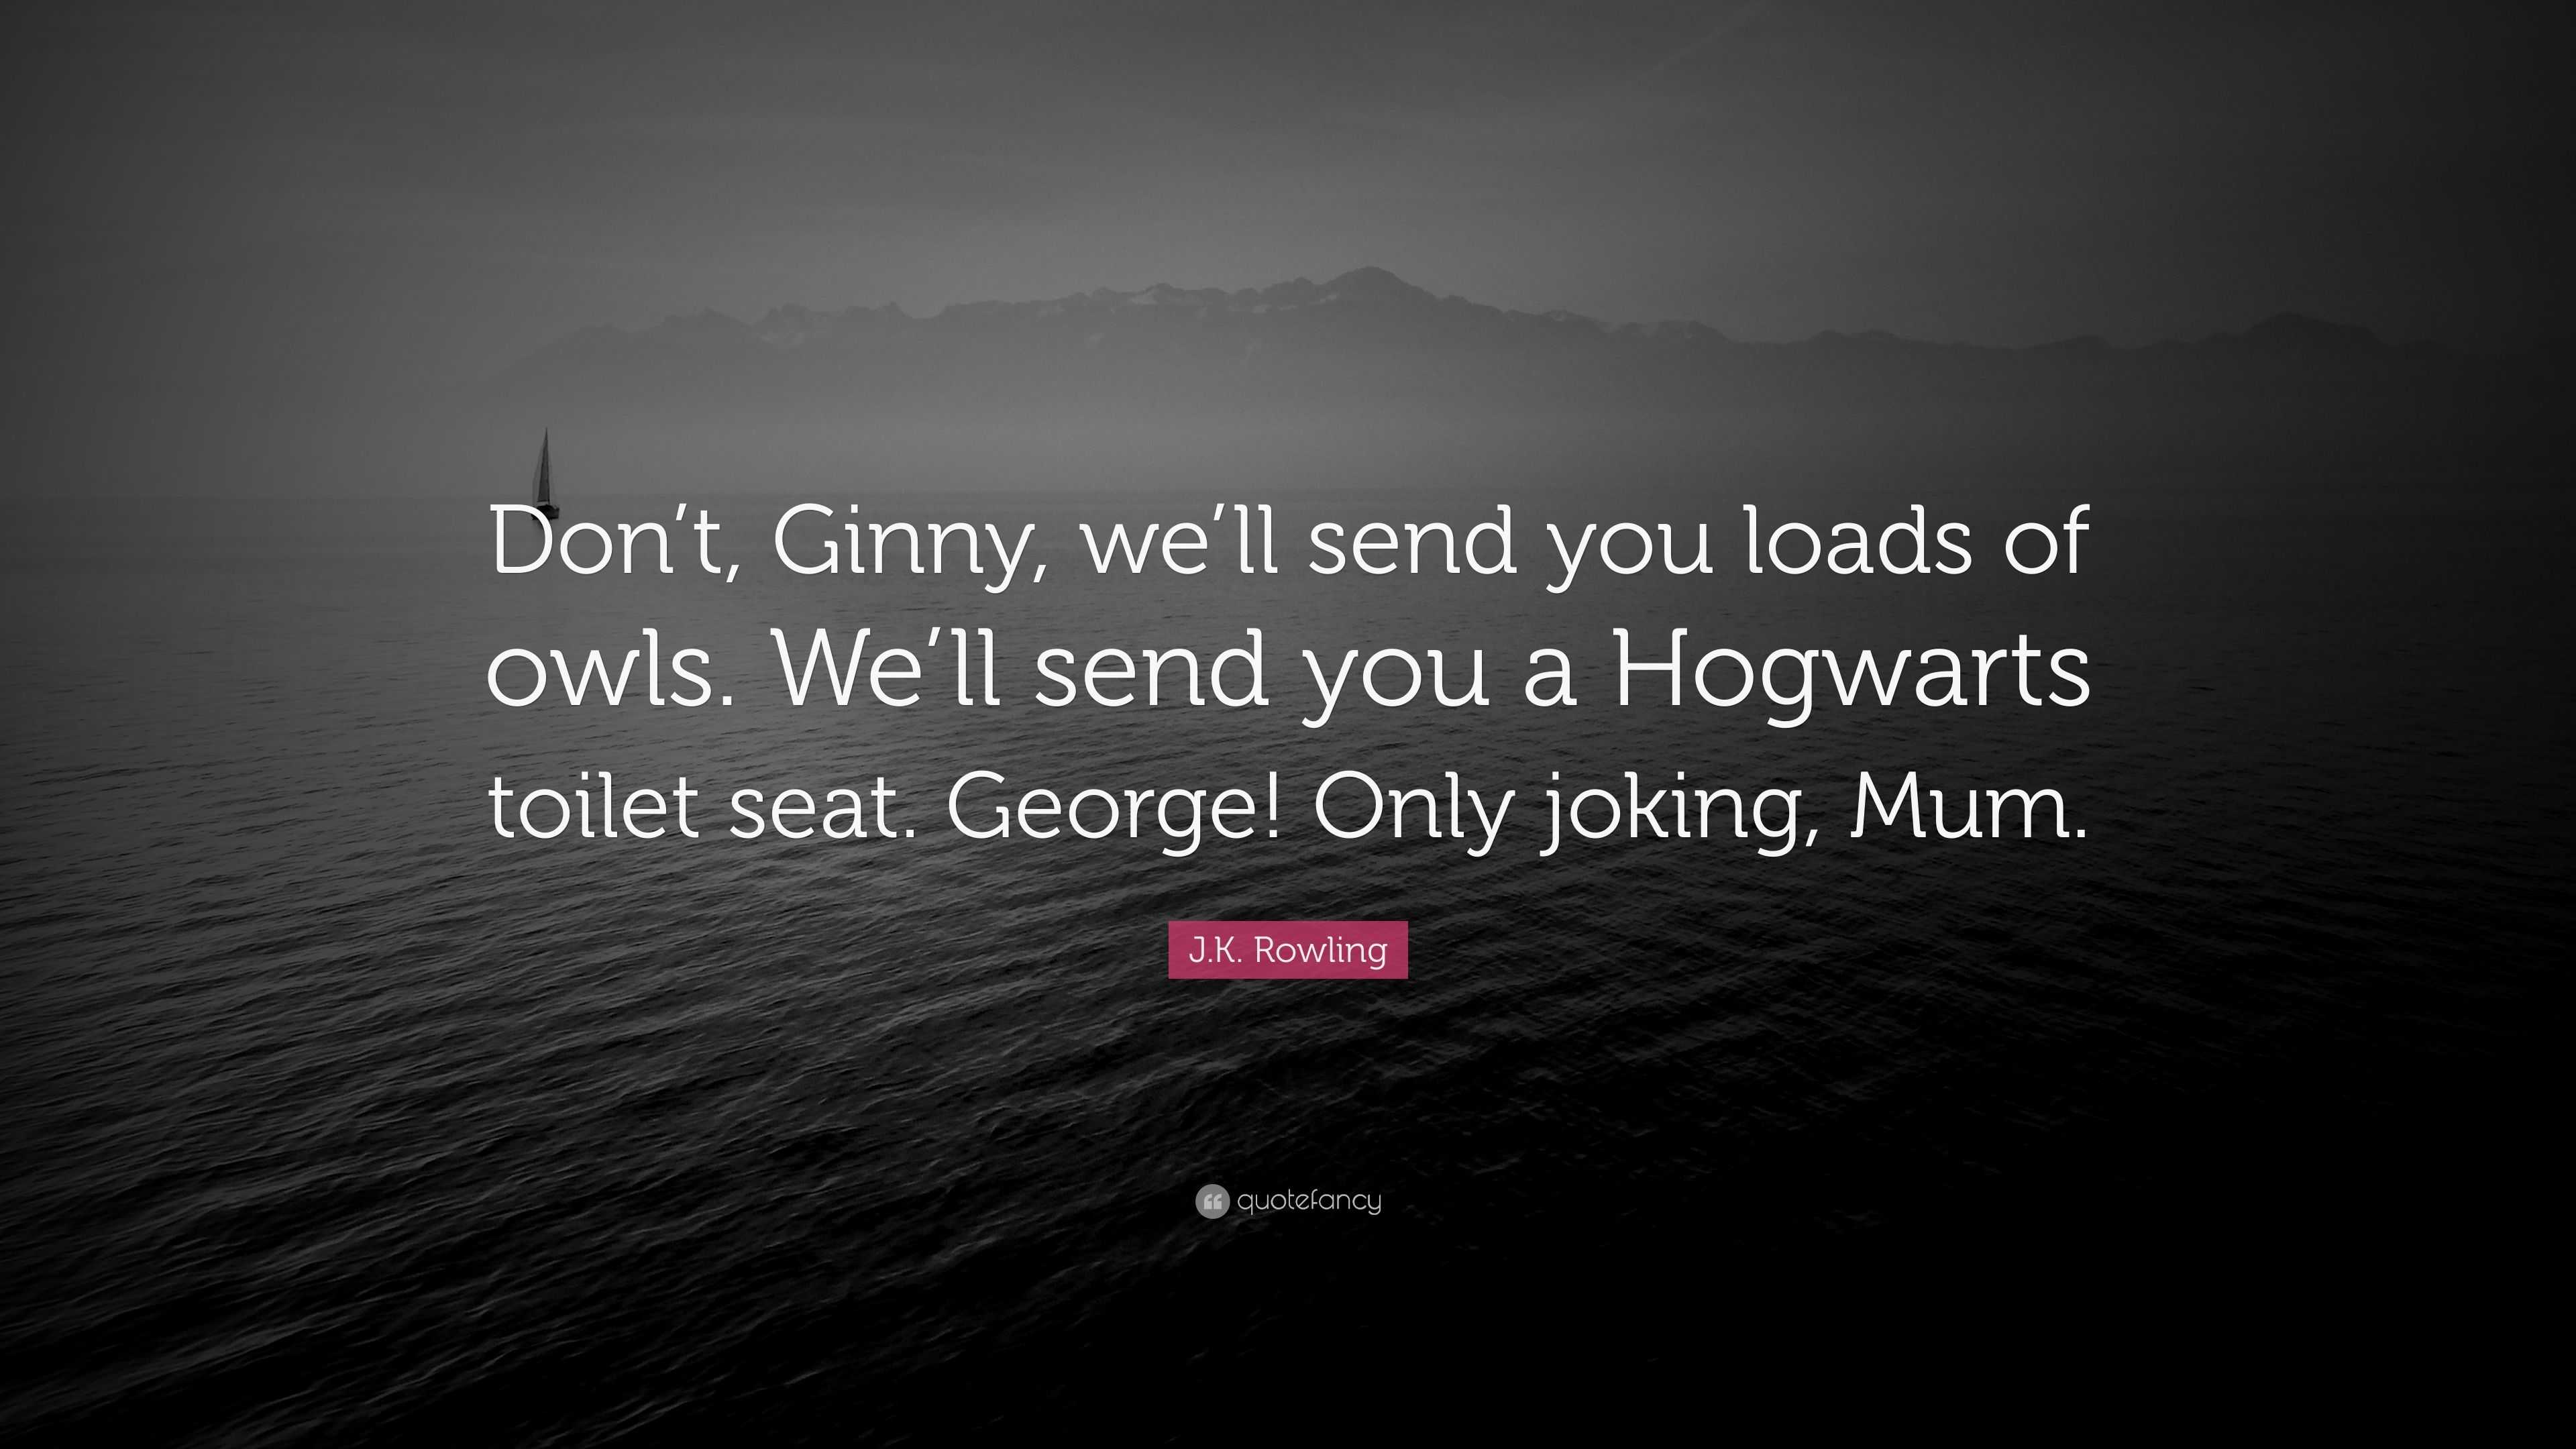 J K Rowling Quote “Don t Ginny we ll send you